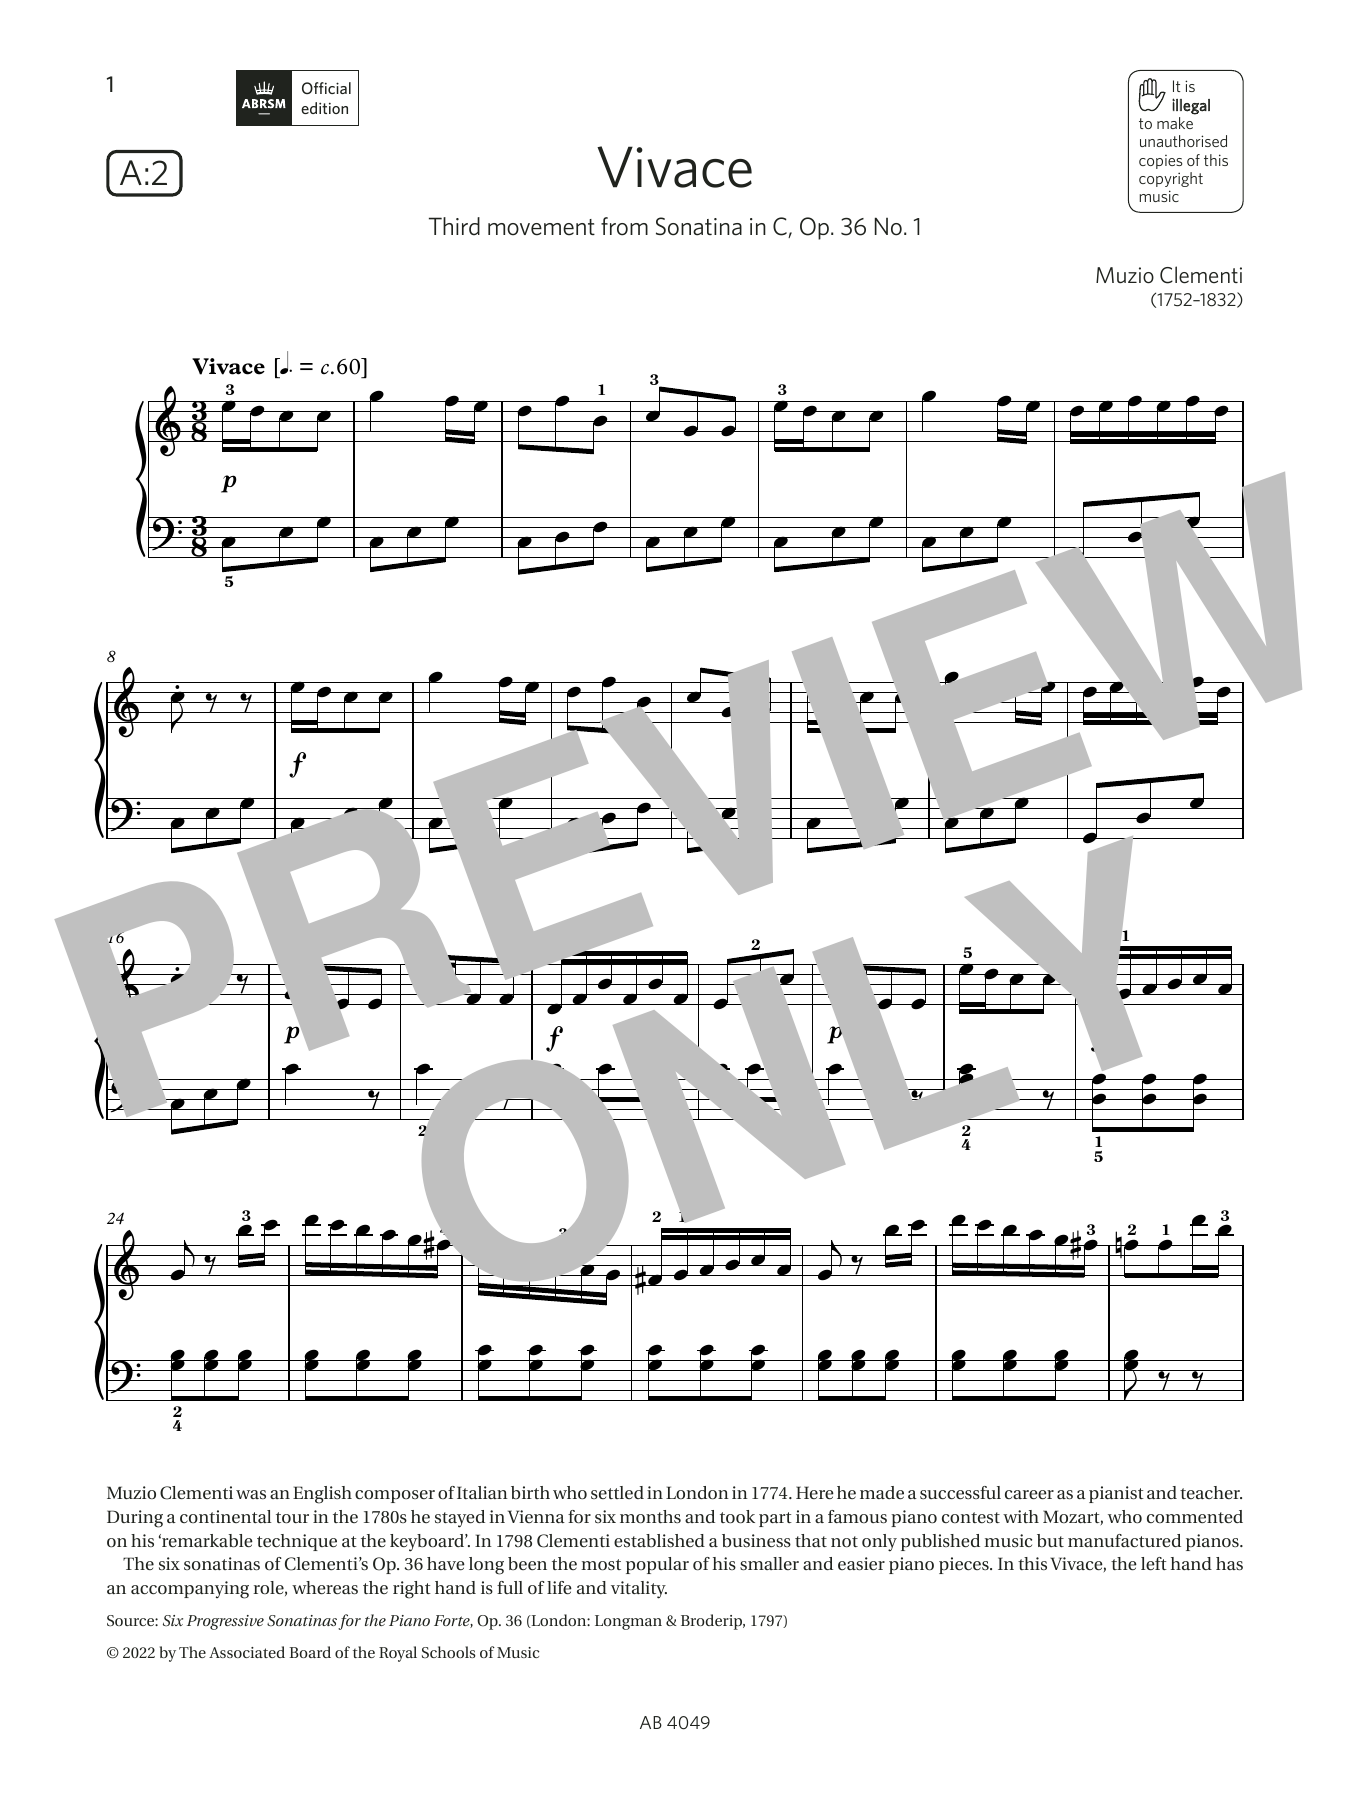 Download Muzio Clementi Vivace (Grade 3, list A2, from the ABRS Sheet Music